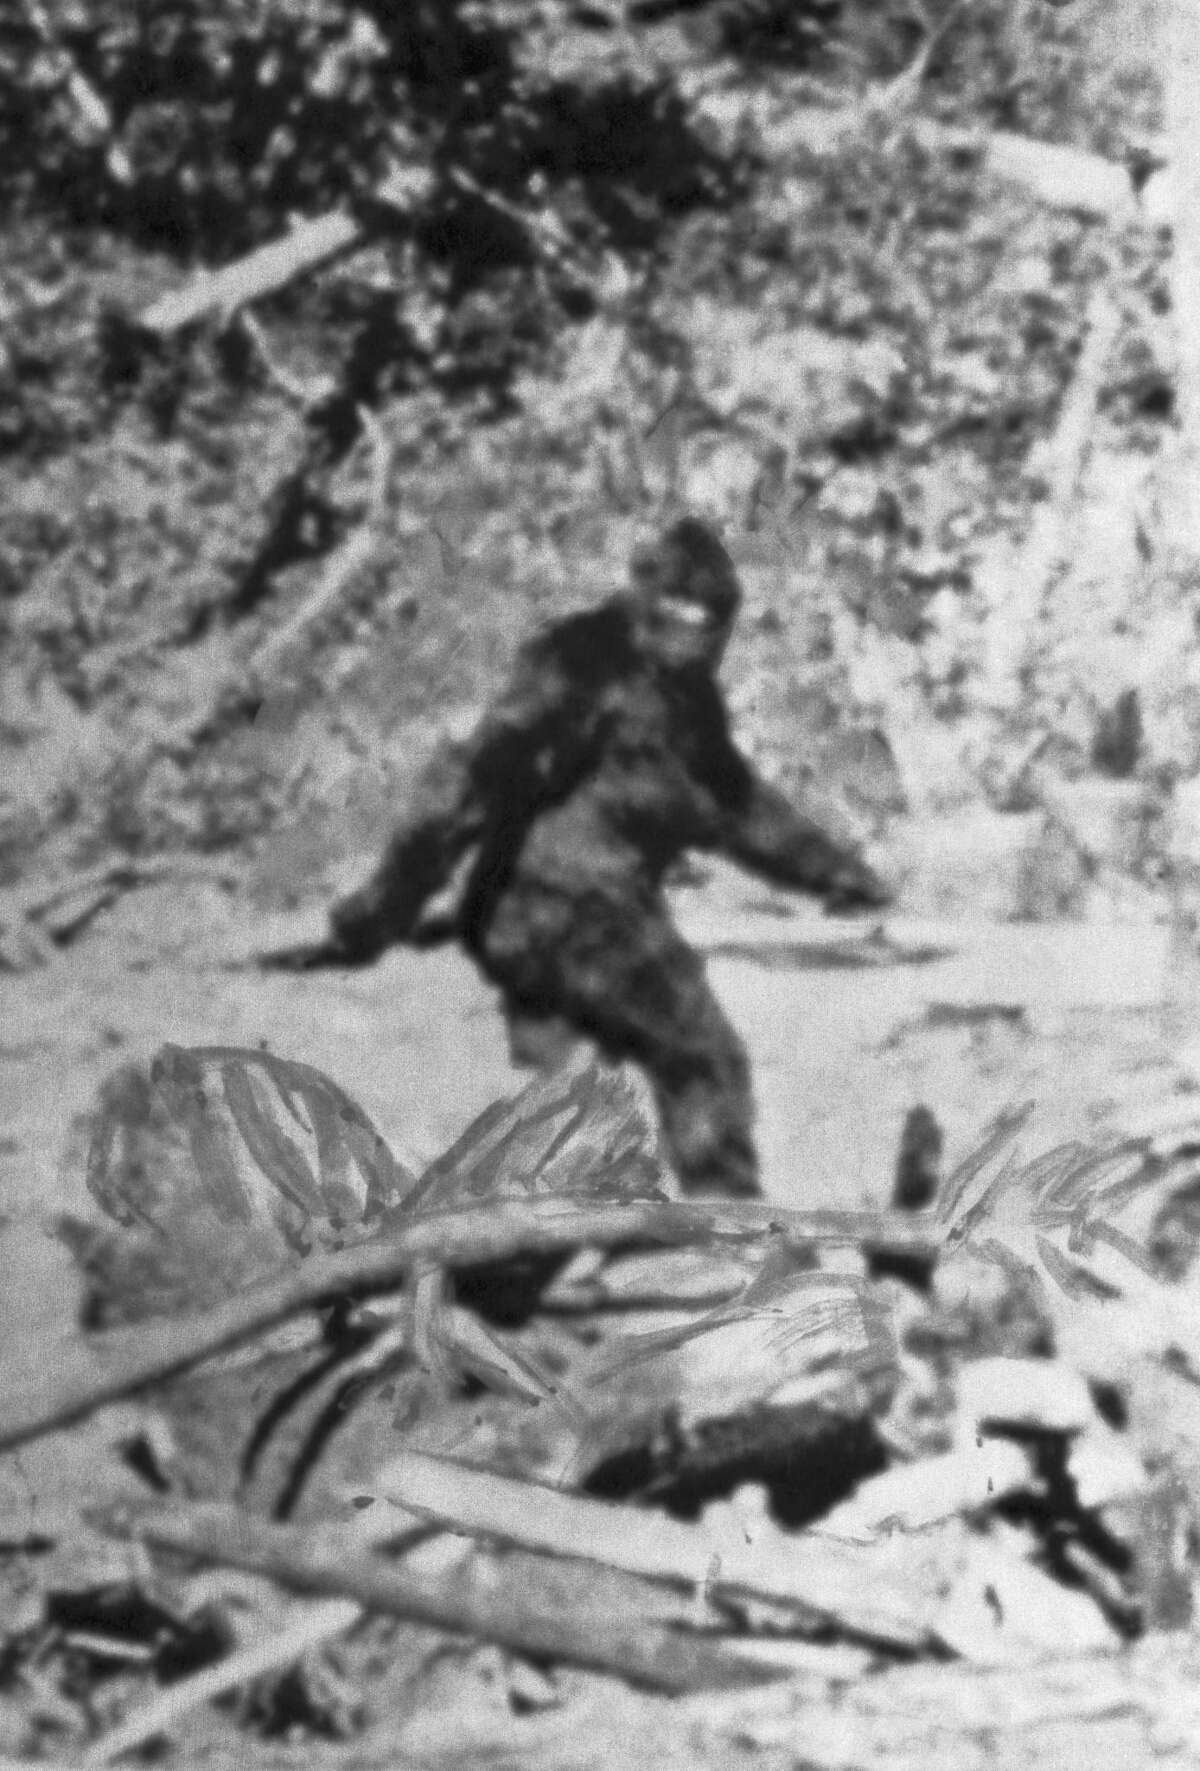 An image taken from film footage by Roger Patterson and Robert "'Bob" Gimlin reports to show a Bigfoot sighted in 1967 in Northern California. A recent sighting was reported outside Chandlerville, about 85 miles north of Alton. Madison County. The Bigfoot Field Researchers Organization has recorded 24 reported sightings in Madison County since 1972.